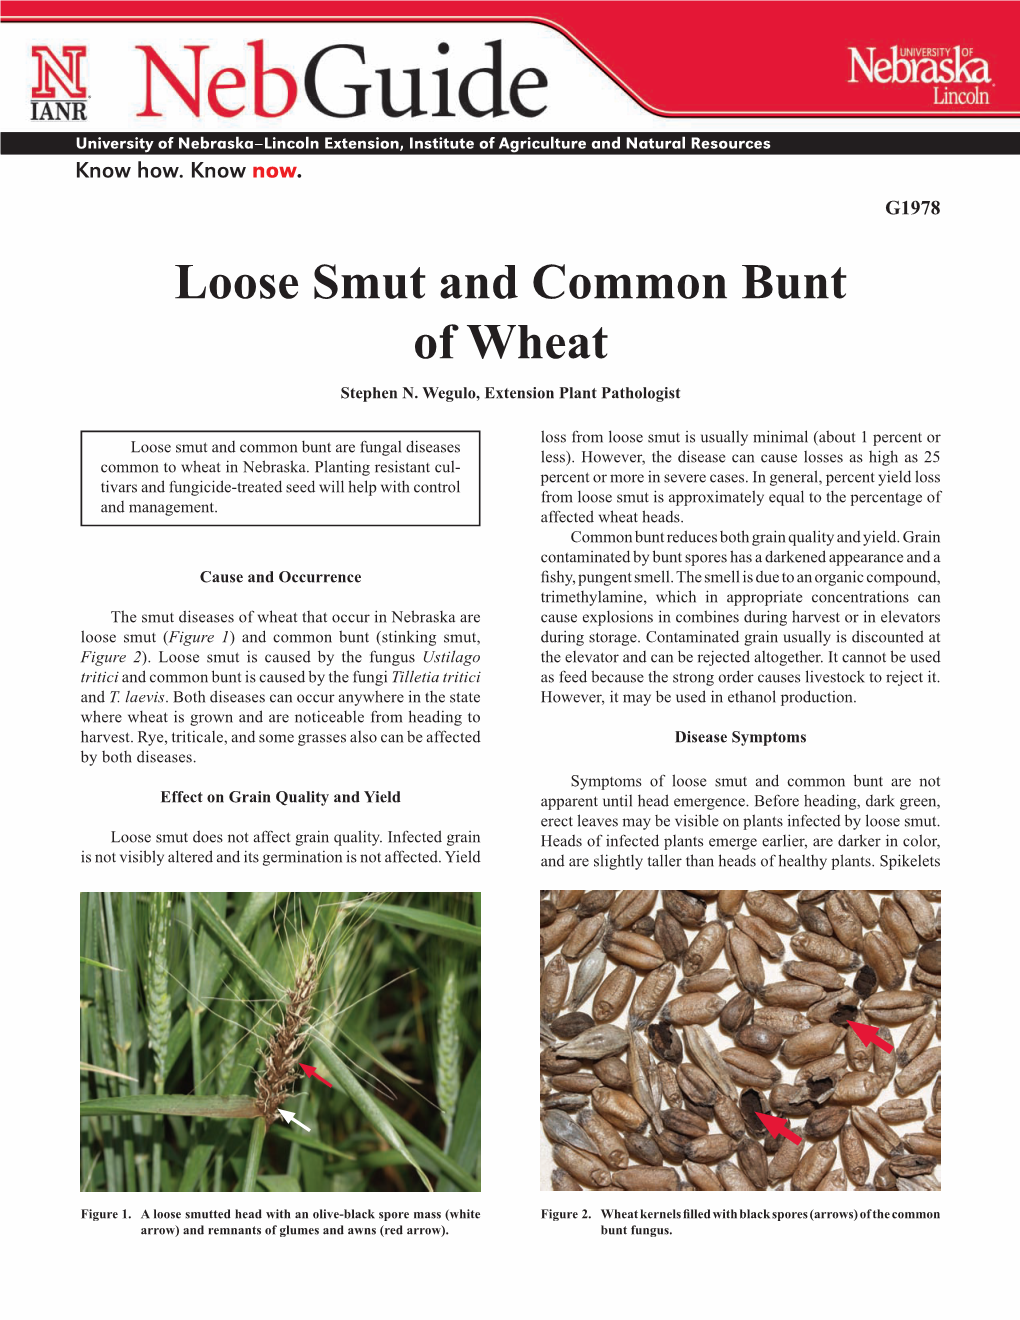 Loose Smut and Common Bunt of Wheat Stephen N